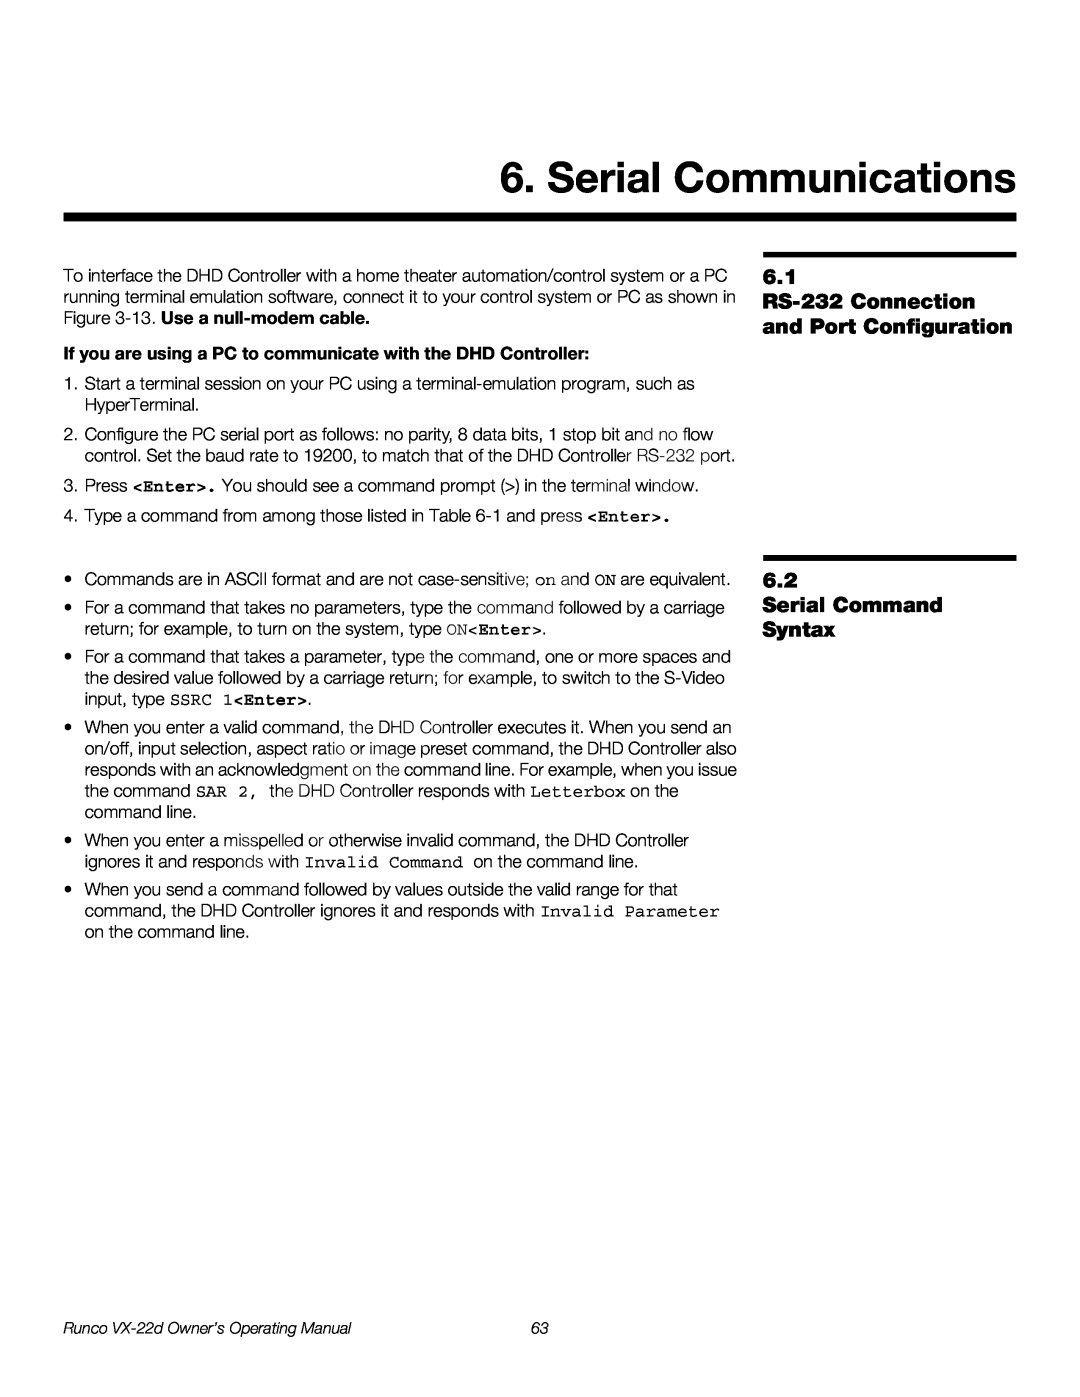 Runco VX-22D manual Serial Communications, 6.1 RS-232 Connection and Port Configuration 6.2, Serial Command Syntax 